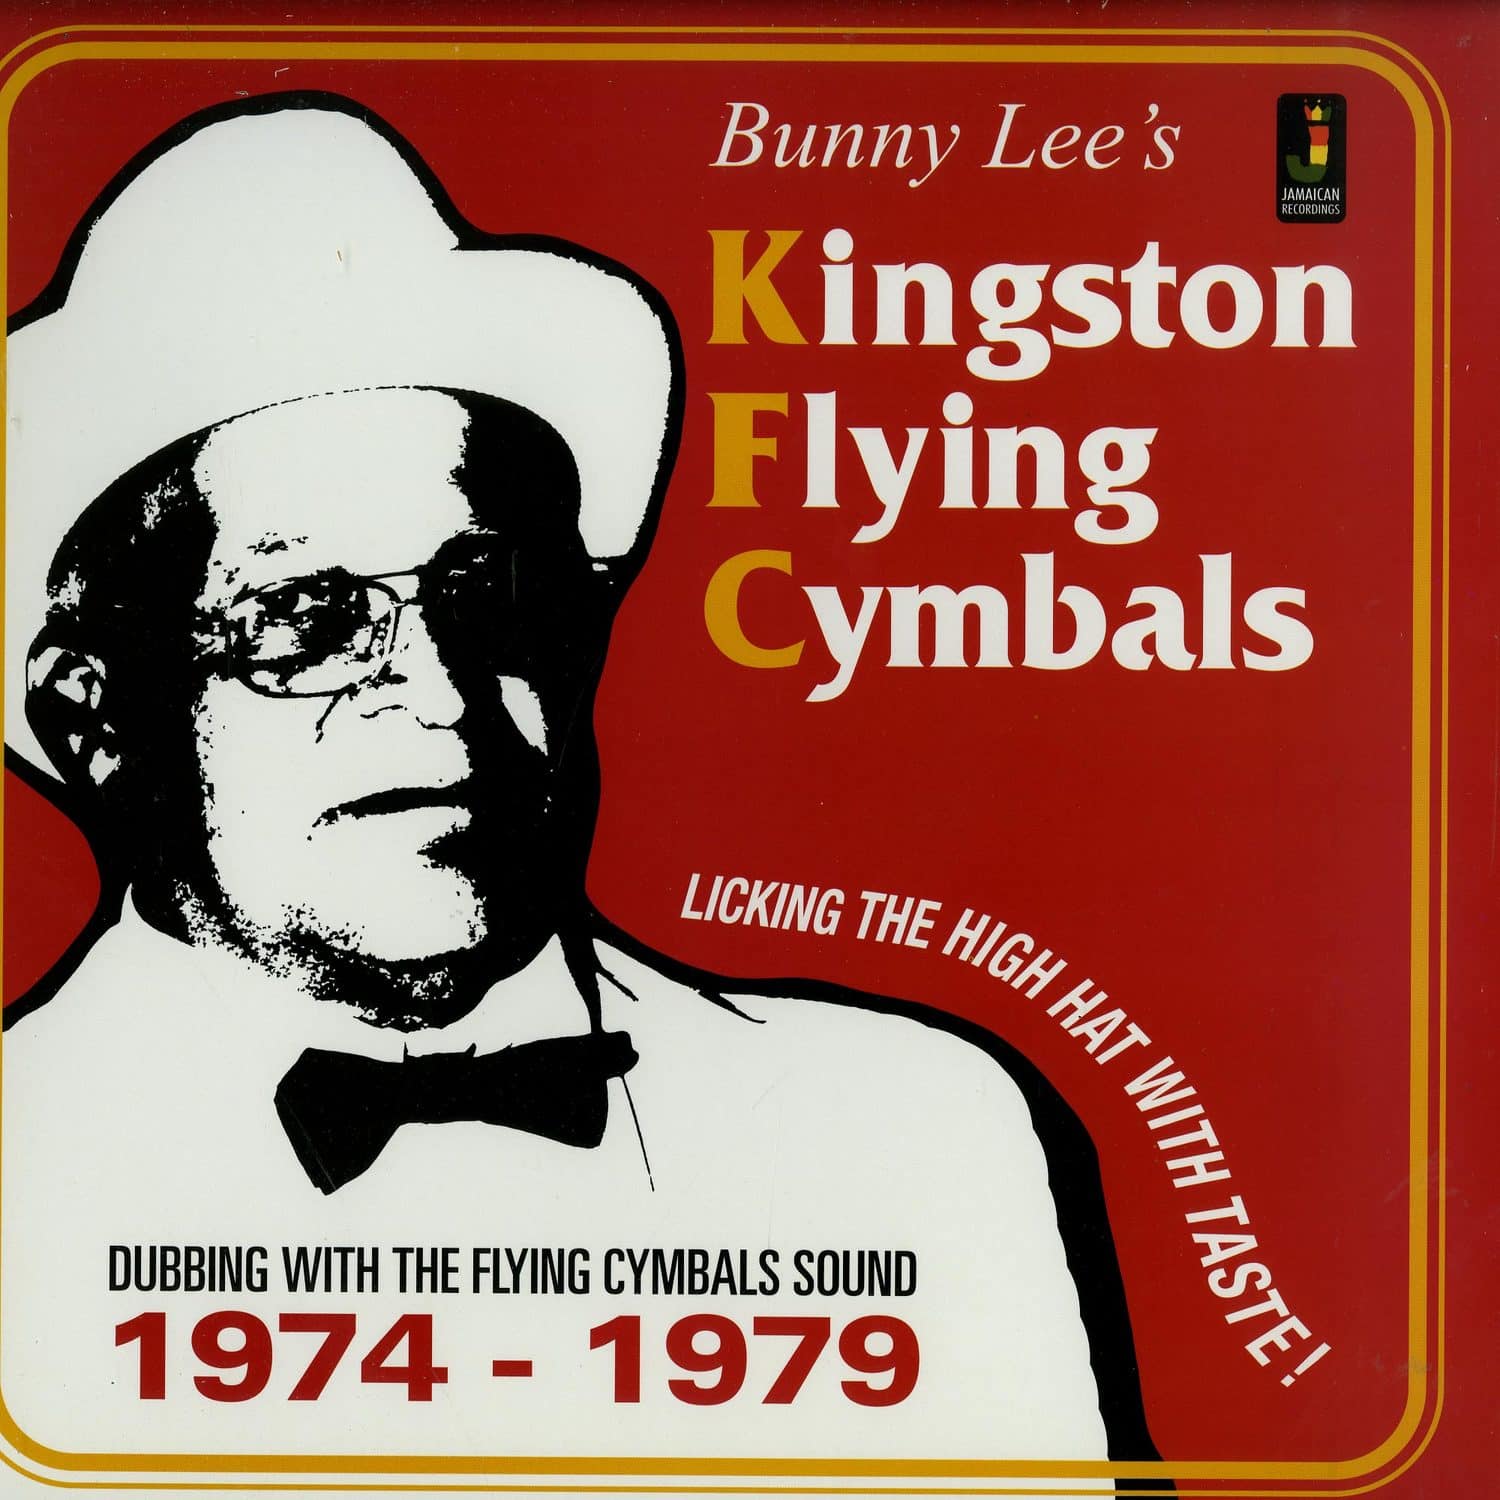 Bunny Lees Kingston Flying Cymbals - DUBBING WITH THE FLYING CYMBALS SOUND 